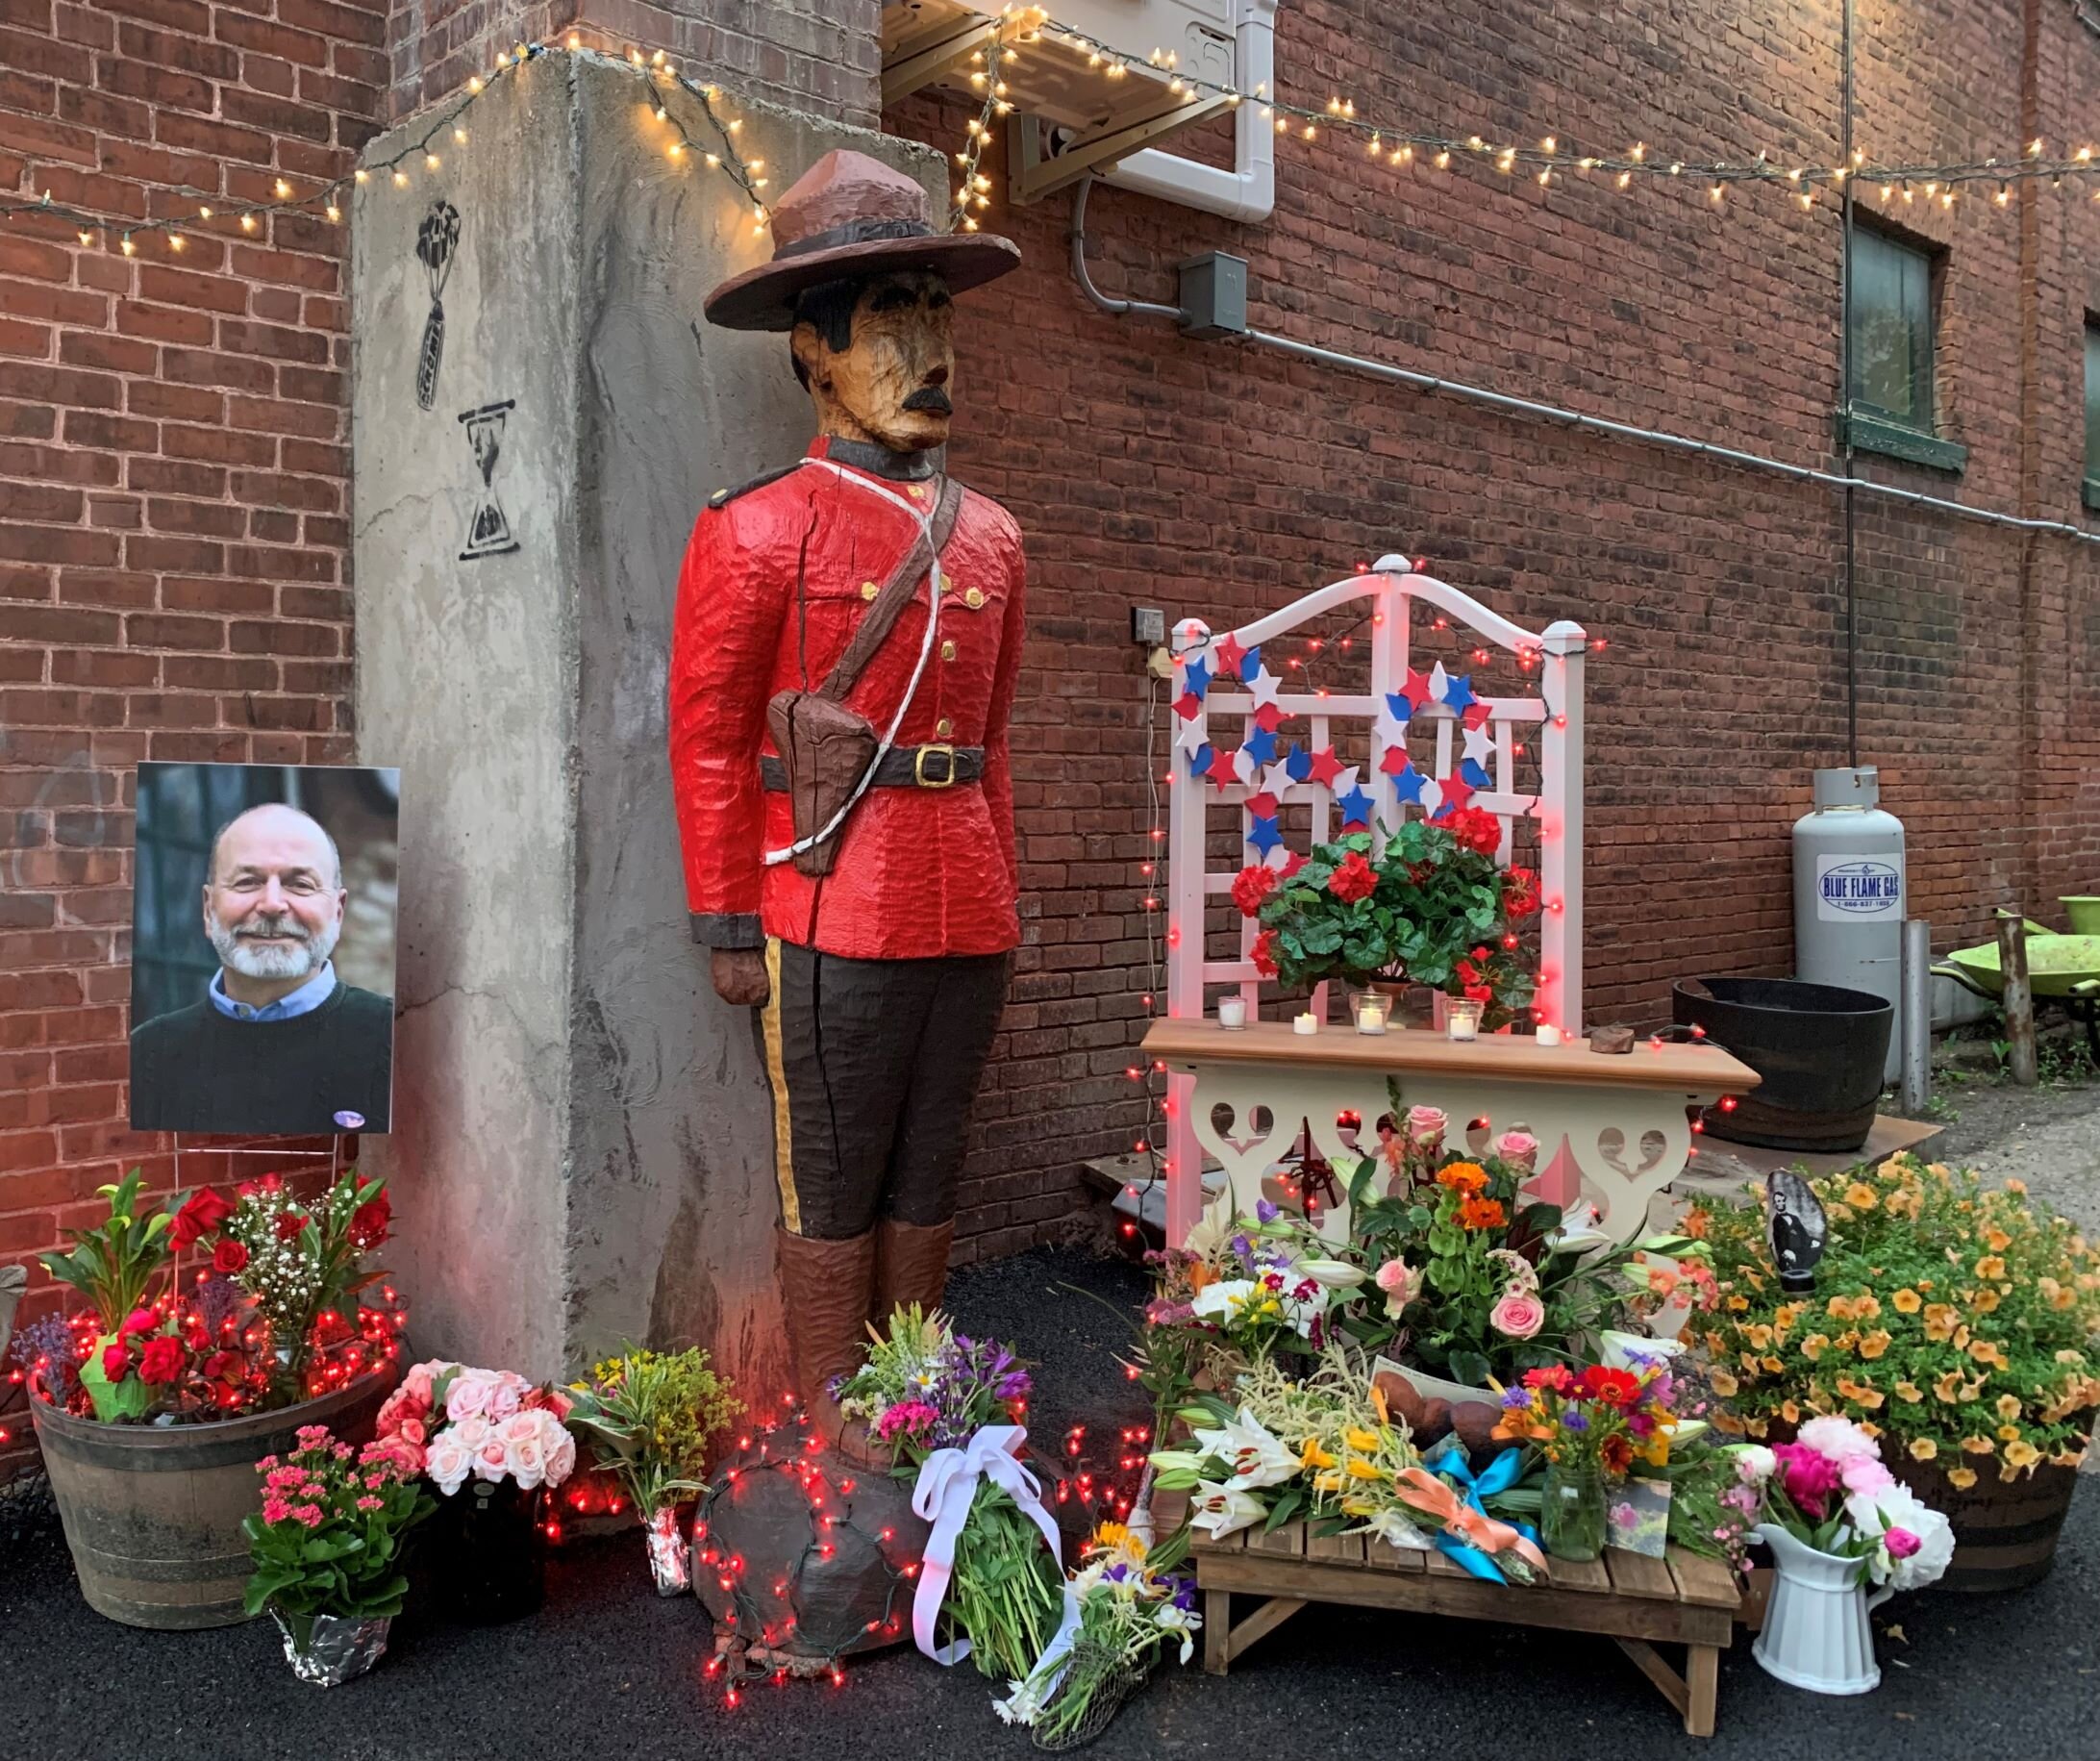   A colorful memorial comes together in the alley beside Stowe Street Emporium as news of Jack Carter's passing spreads through the community on Tuesday, June 22. The wooden Canadian Mountie was a familiar fixture in the shop when Carter and Schulthe